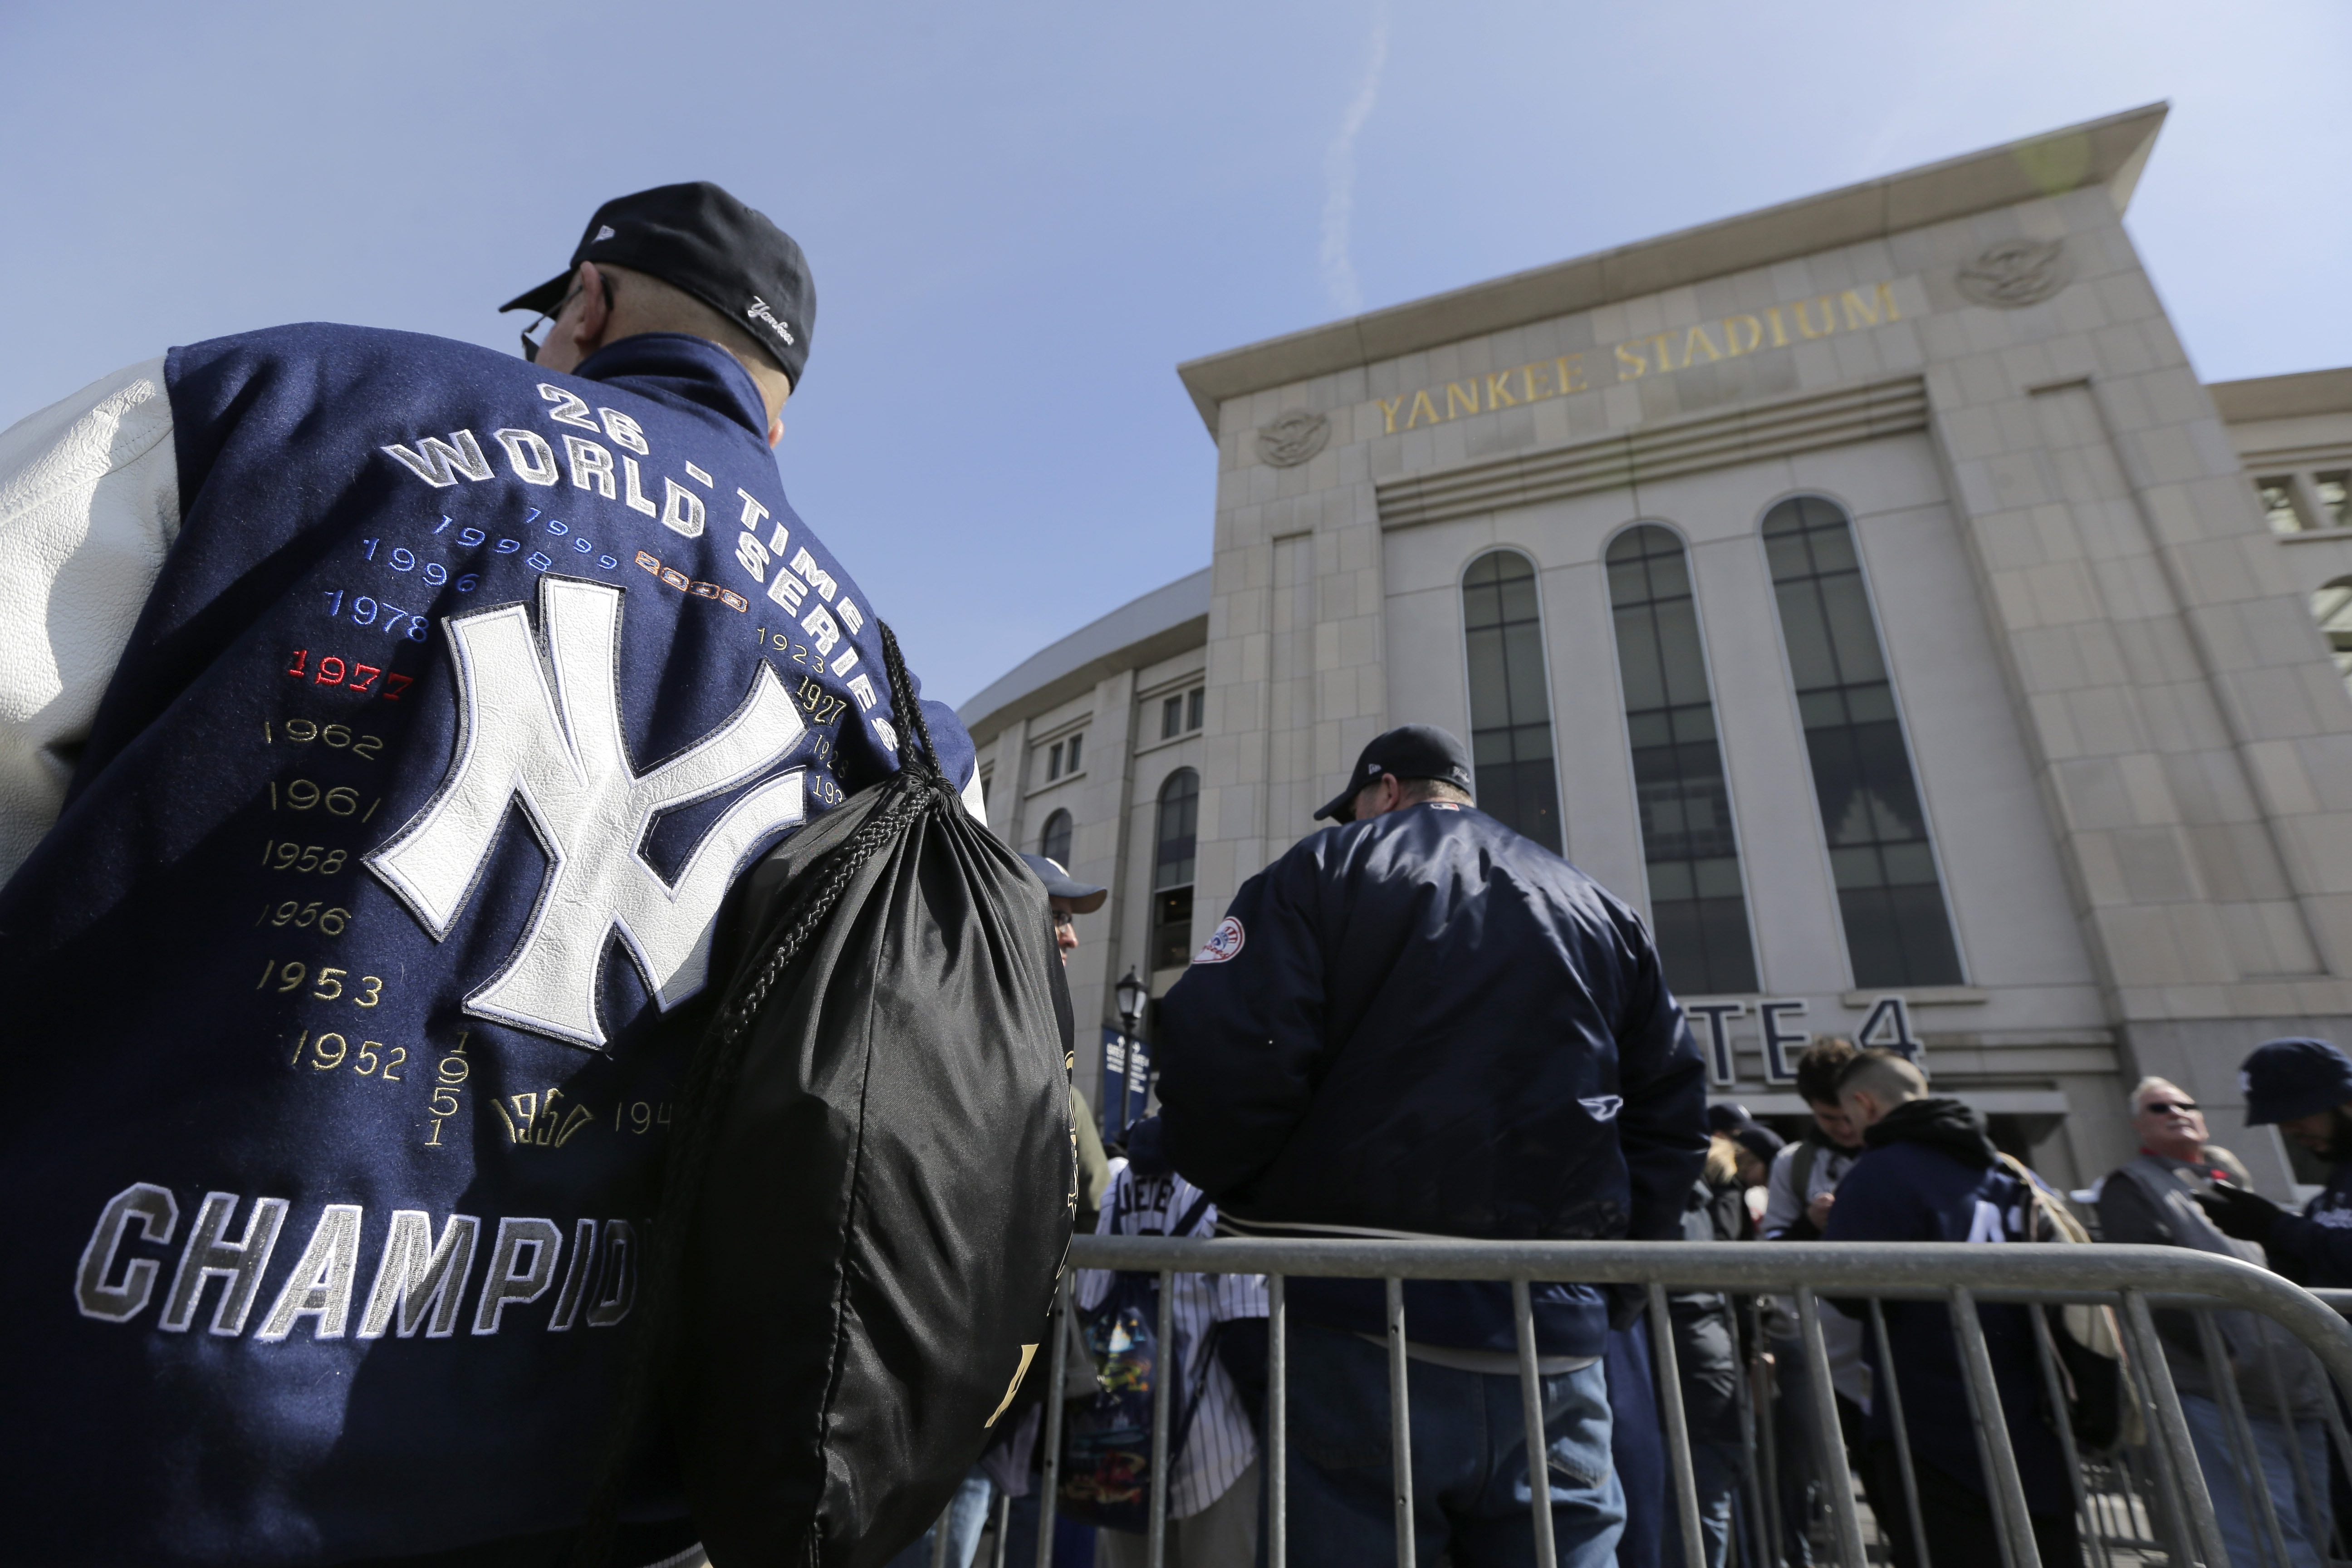 ESPN - So, the New York Yankees are kind of running out of jersey